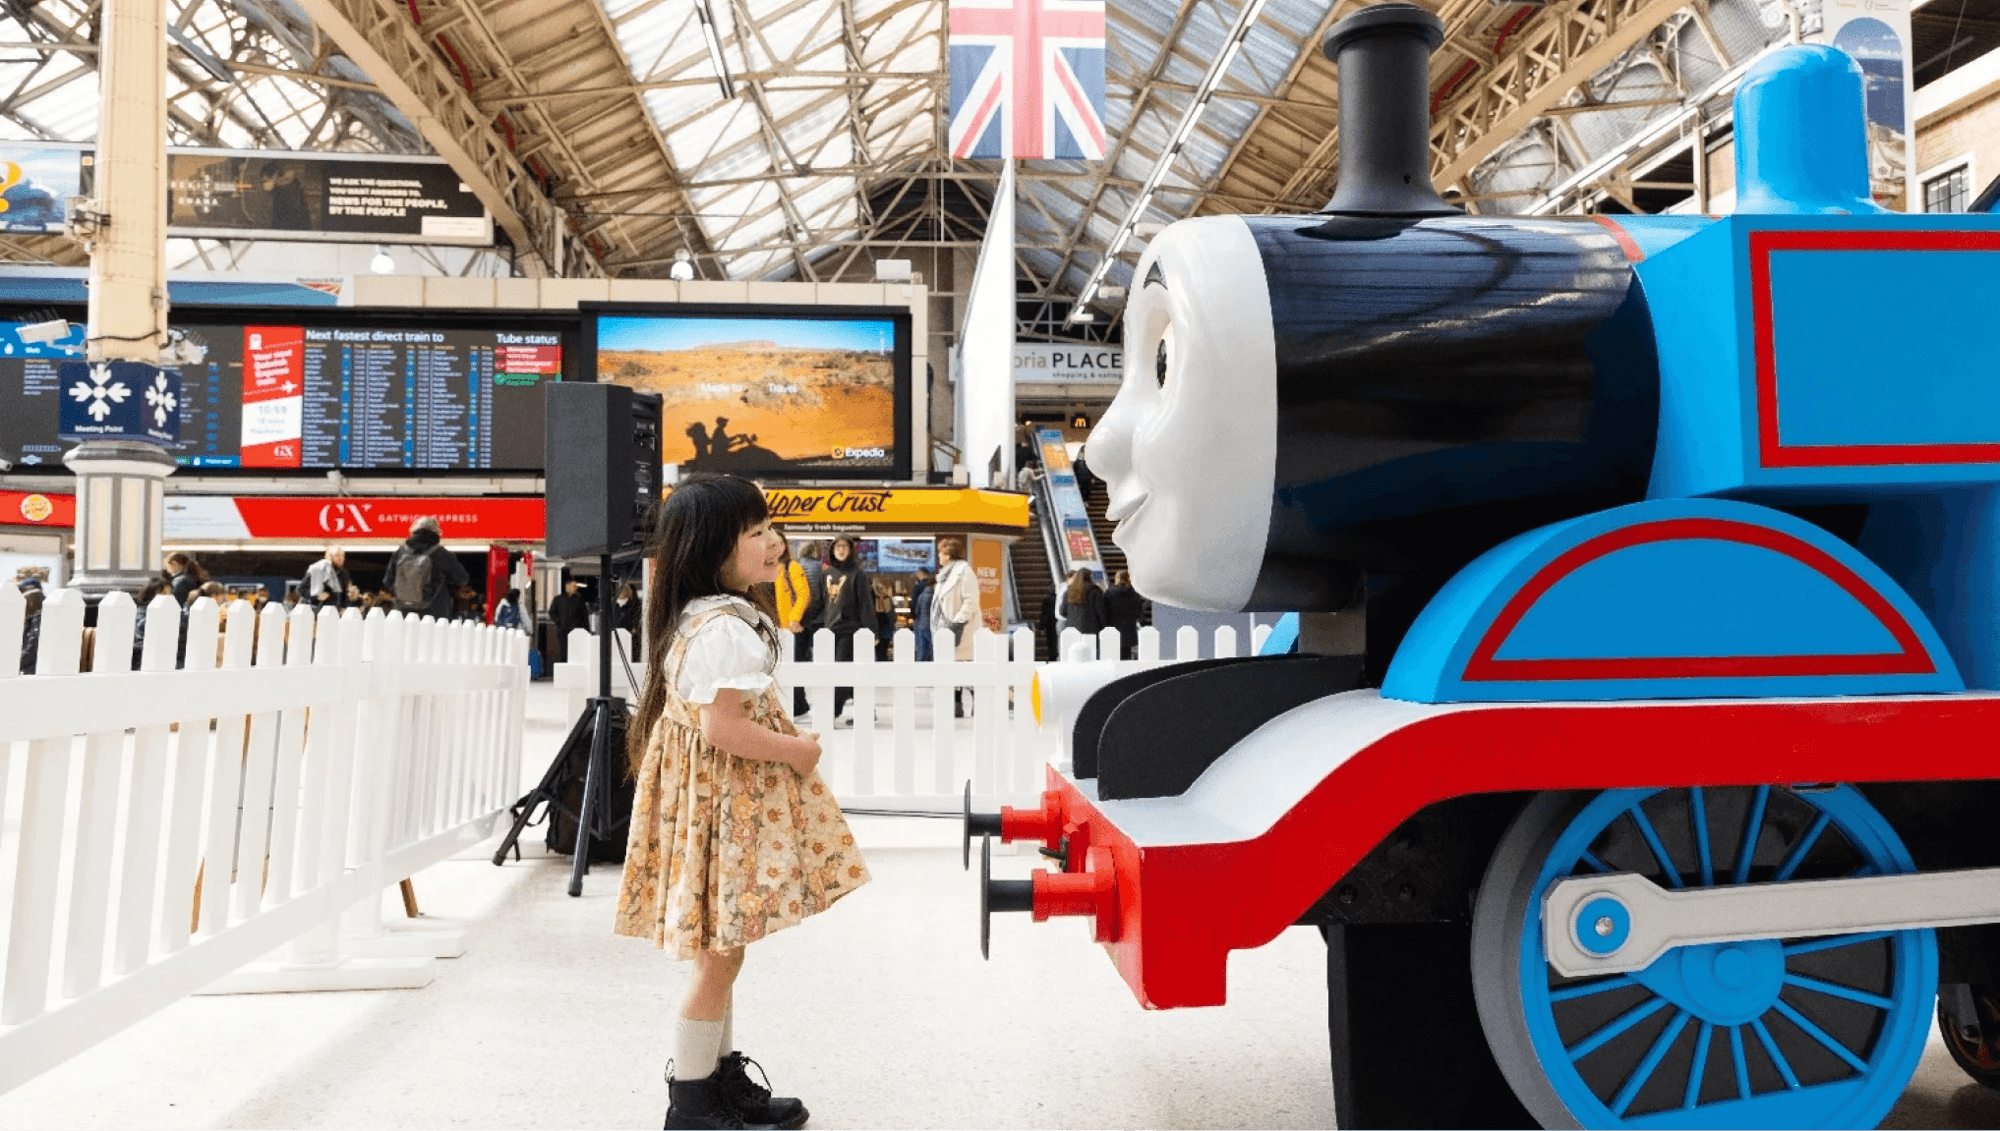 A young girl standing in a station, in front of a thomas the tank engine installation.